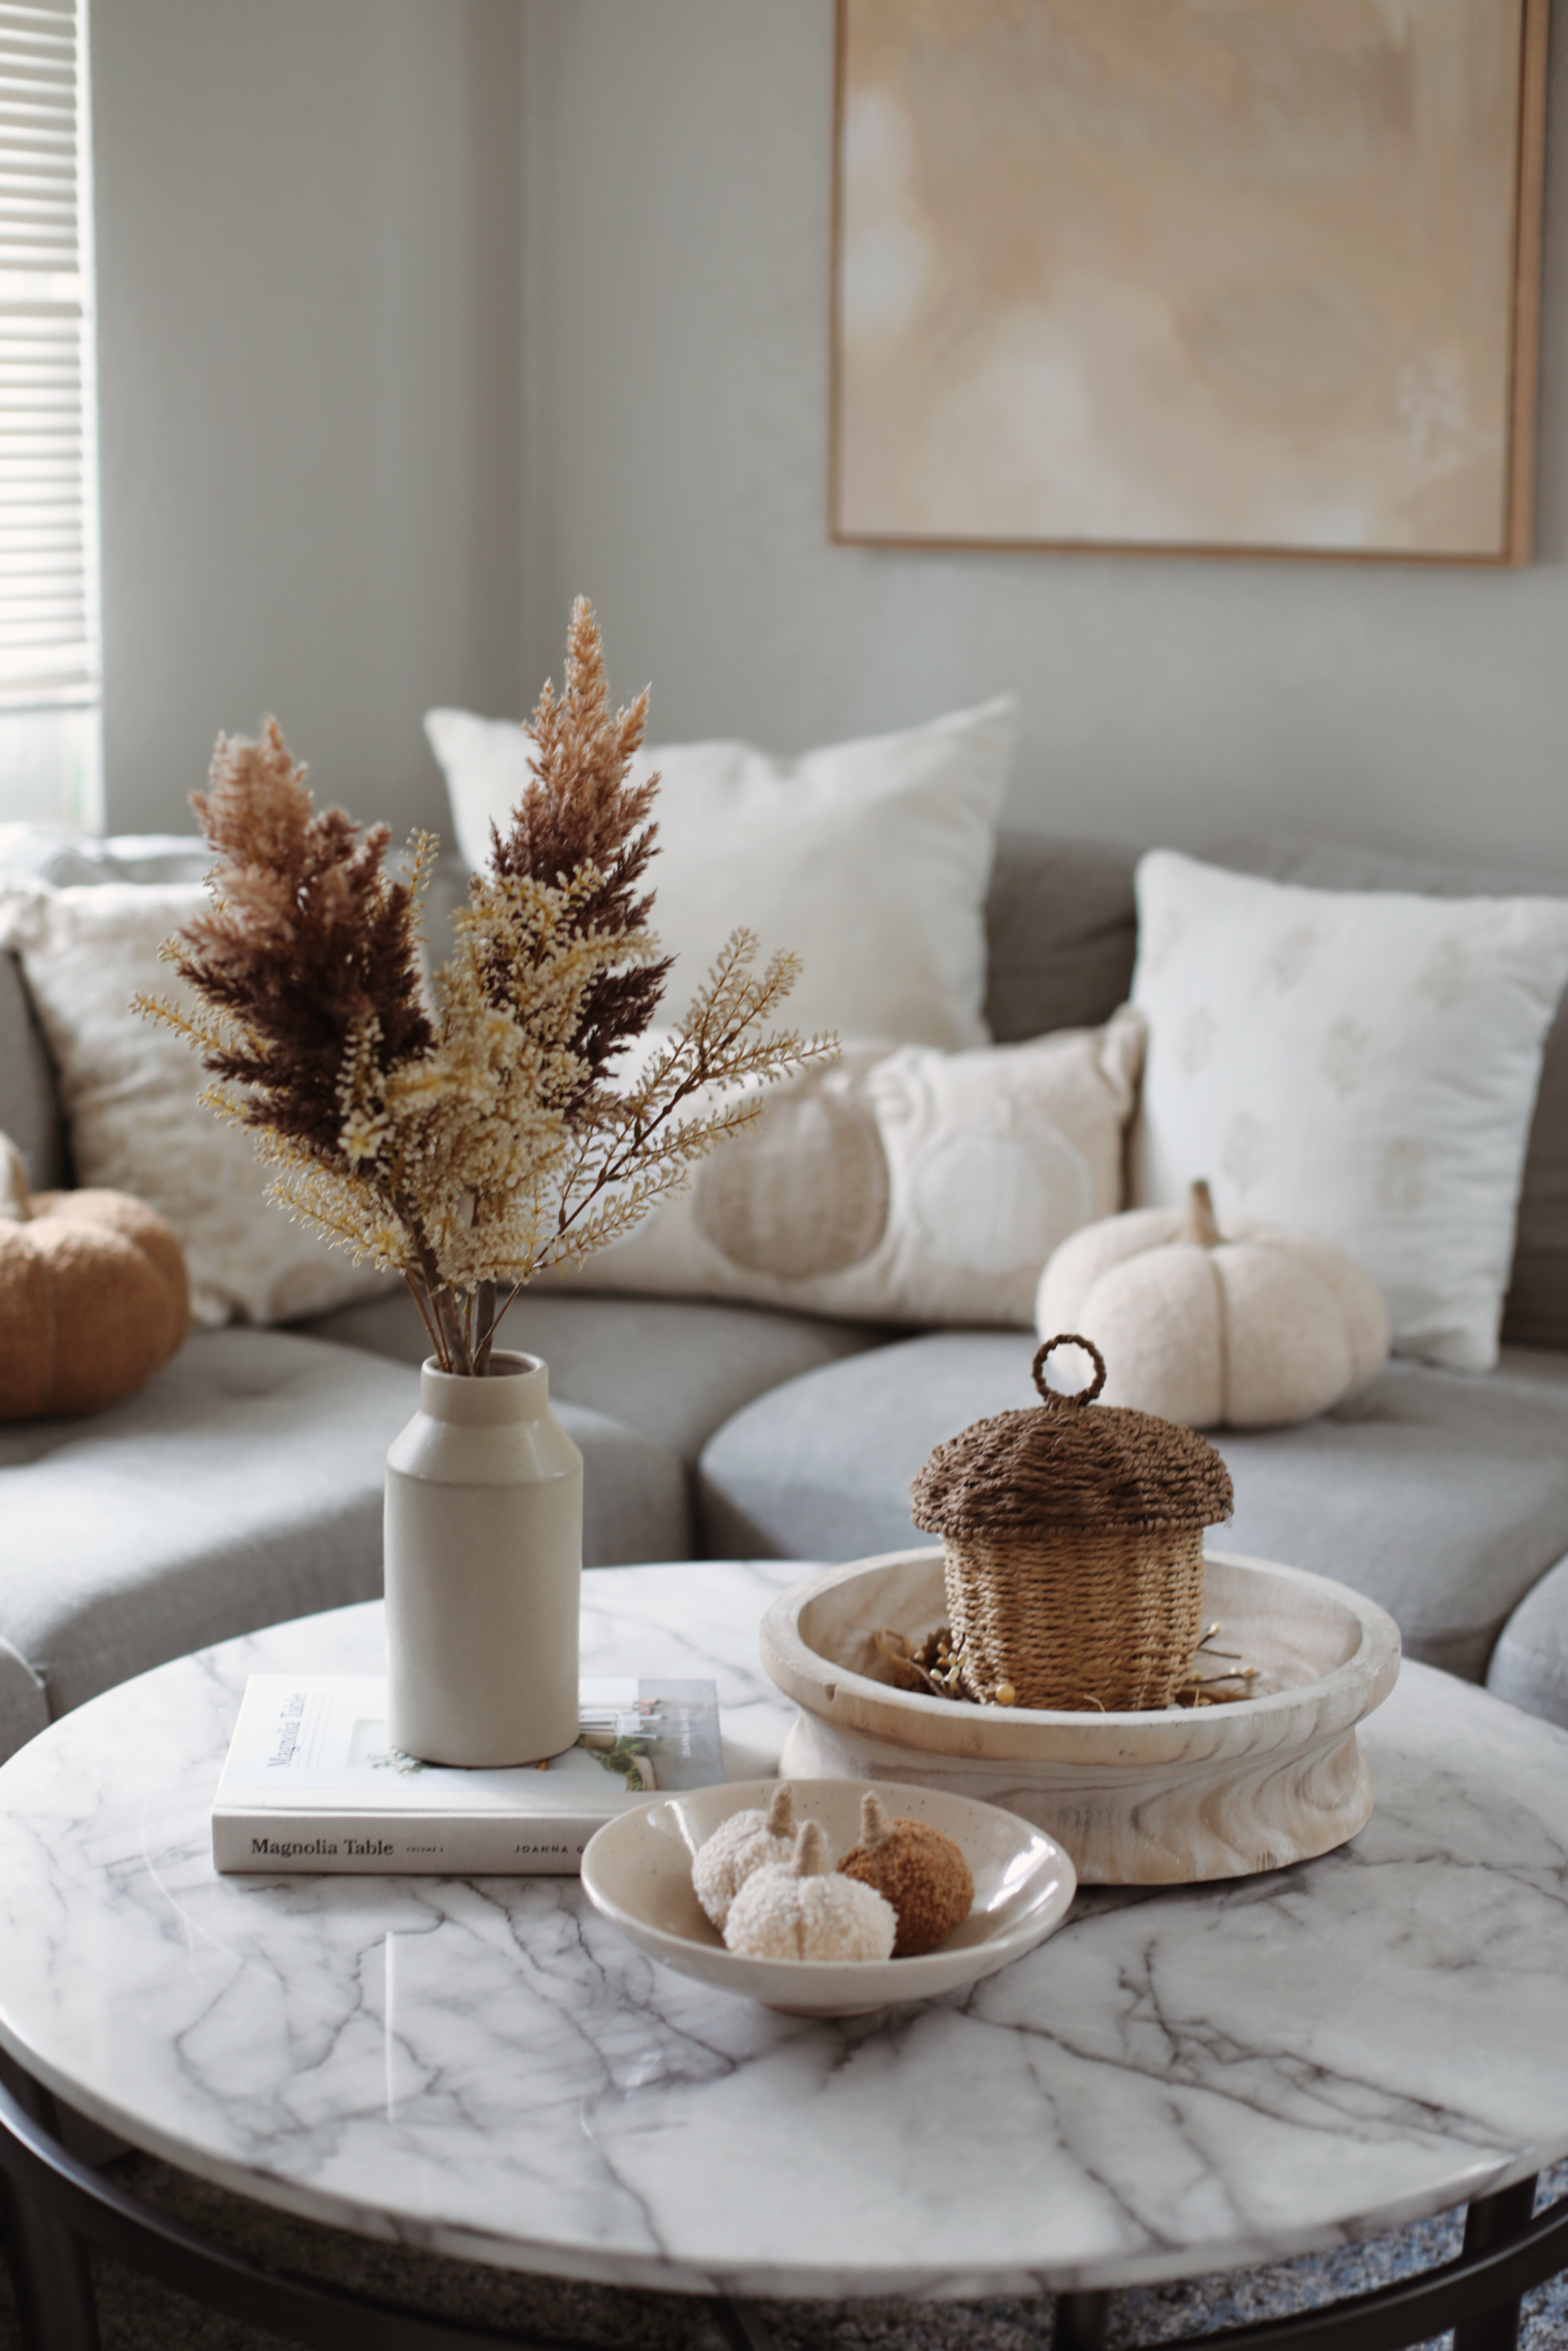 Fall Home Decor Ideas 2023 | Fall Decorating Ideas for a Living Room | Best Fall Home Decor at Target and At Home Stores